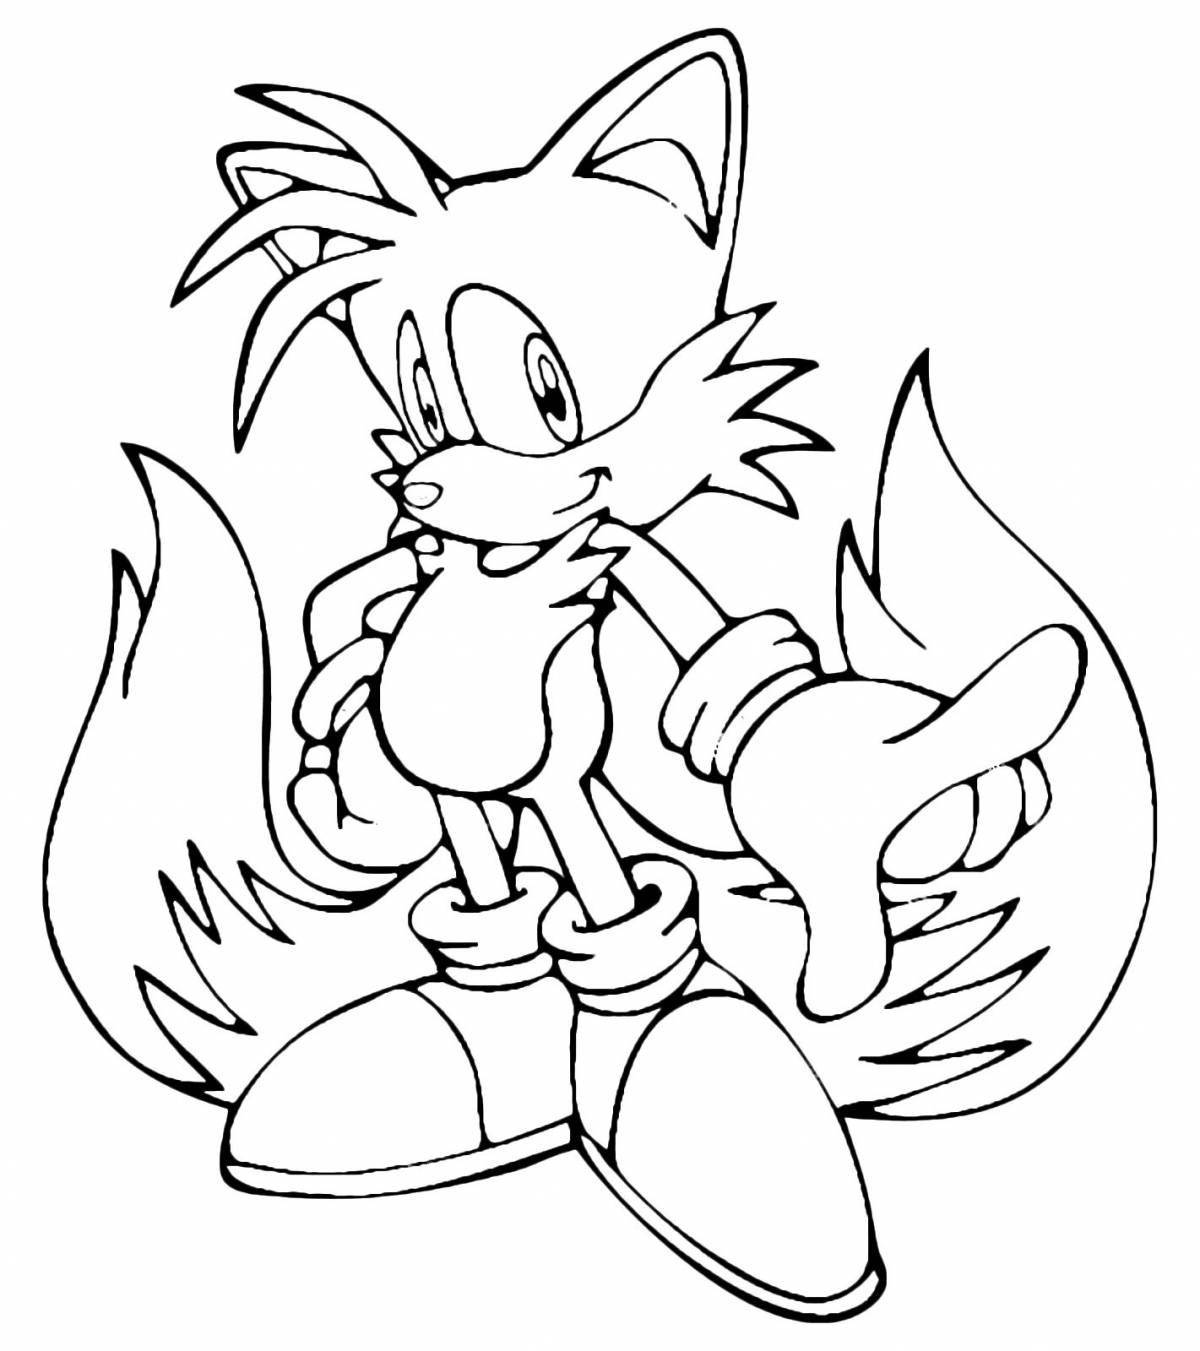 Shimmery tails coloring page